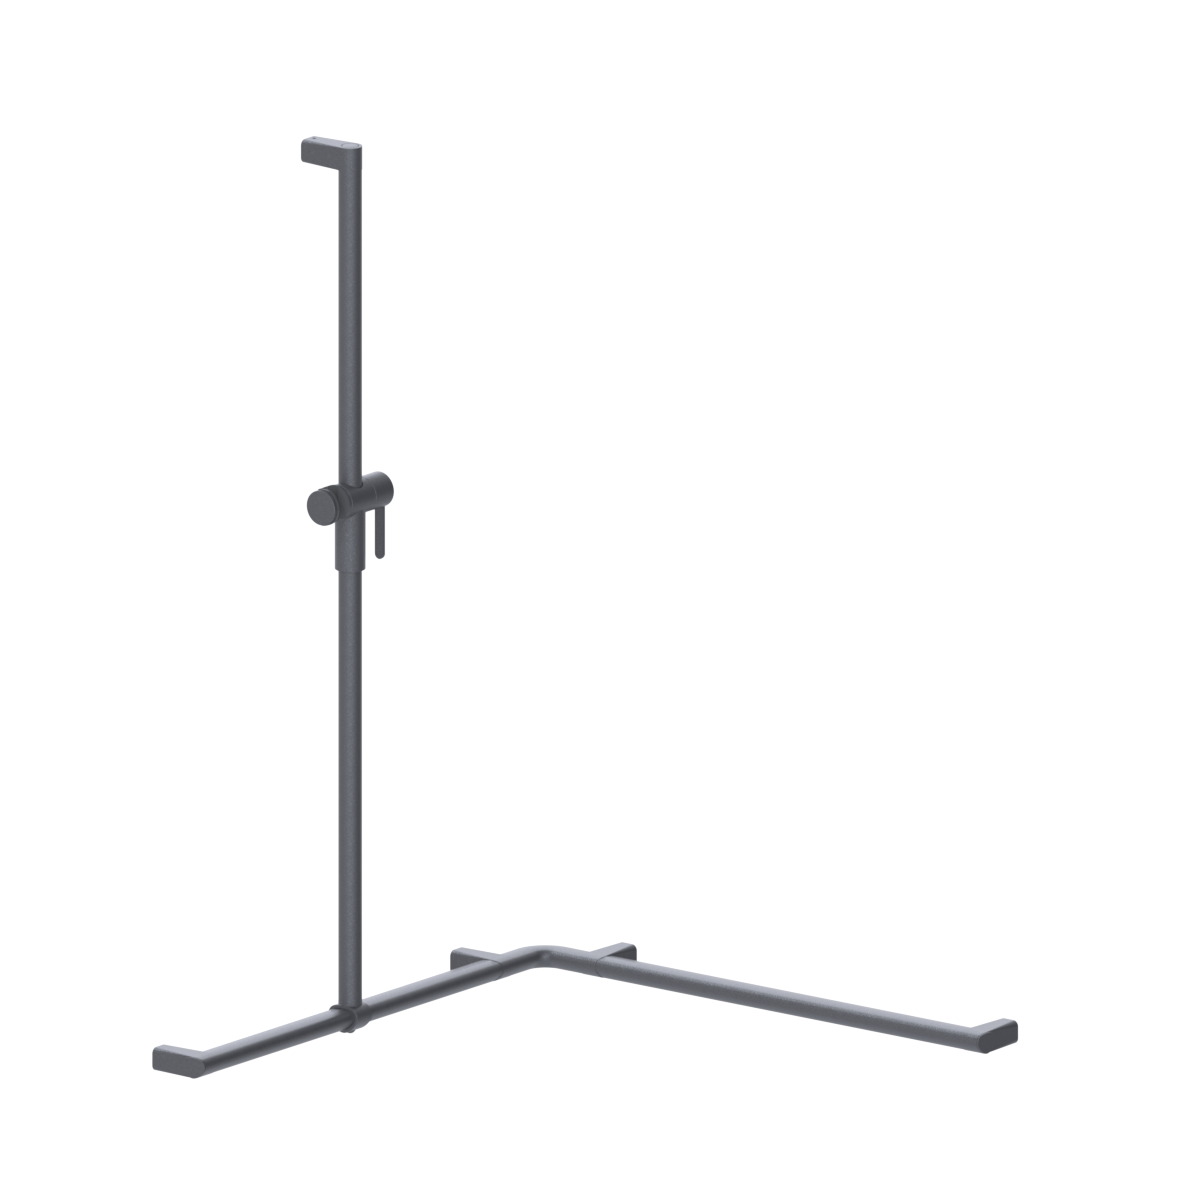 Cavere Care Shower handrail, with movable shower handrail, left, 750 x 750 x 1100 mm, single-point mounting, Cavere Metallic anthracite